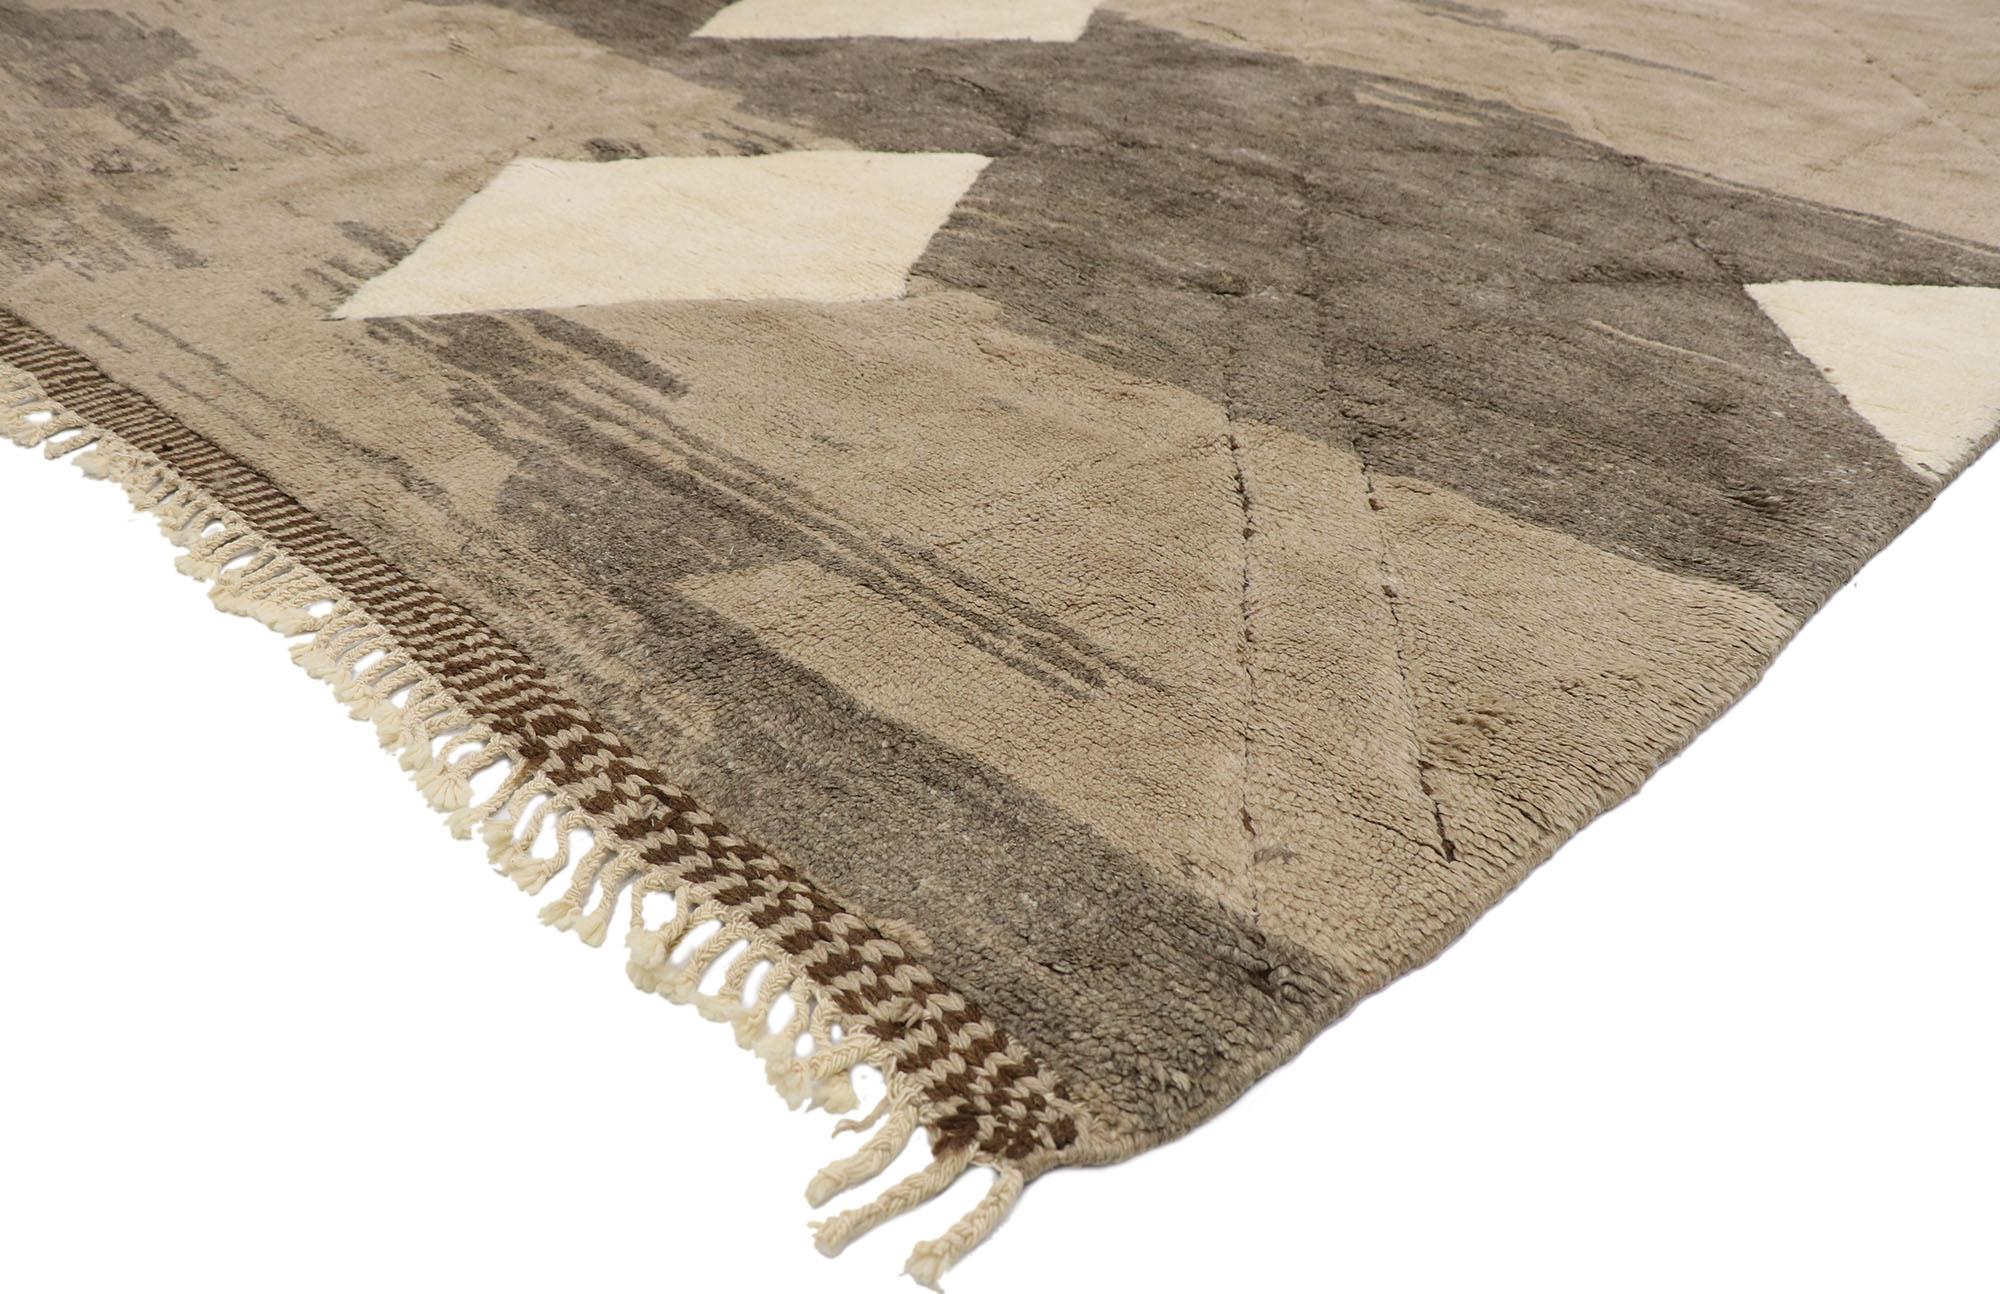 21161 New Contemporary Berber Moroccan rug with Organic Modern Style 10'08 x 12'10. With its simplicity, plush pile and neutral colors, this hand knotted wool contemporary Berber Moroccan rug provides a feeling of cozy contentment without the